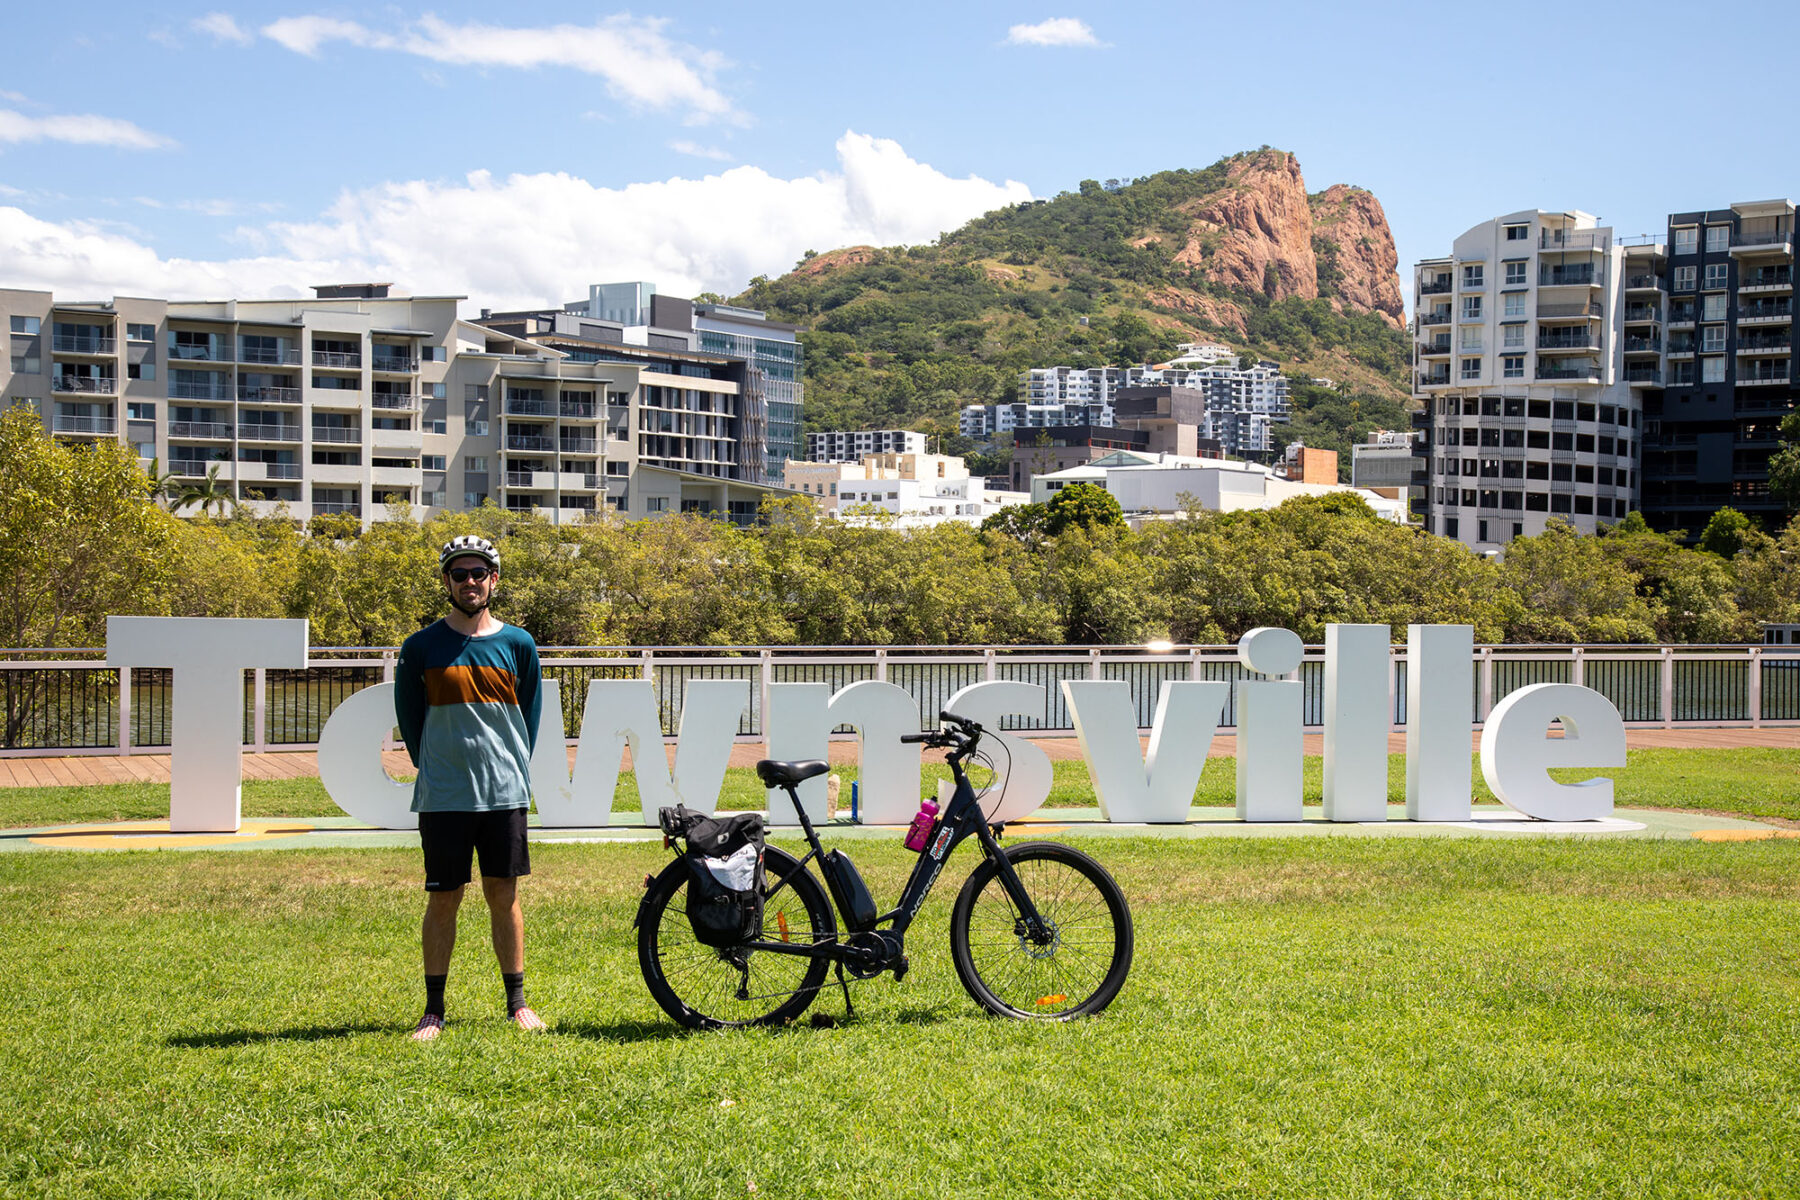 A cyclist and his bike in front of the Townsville sign